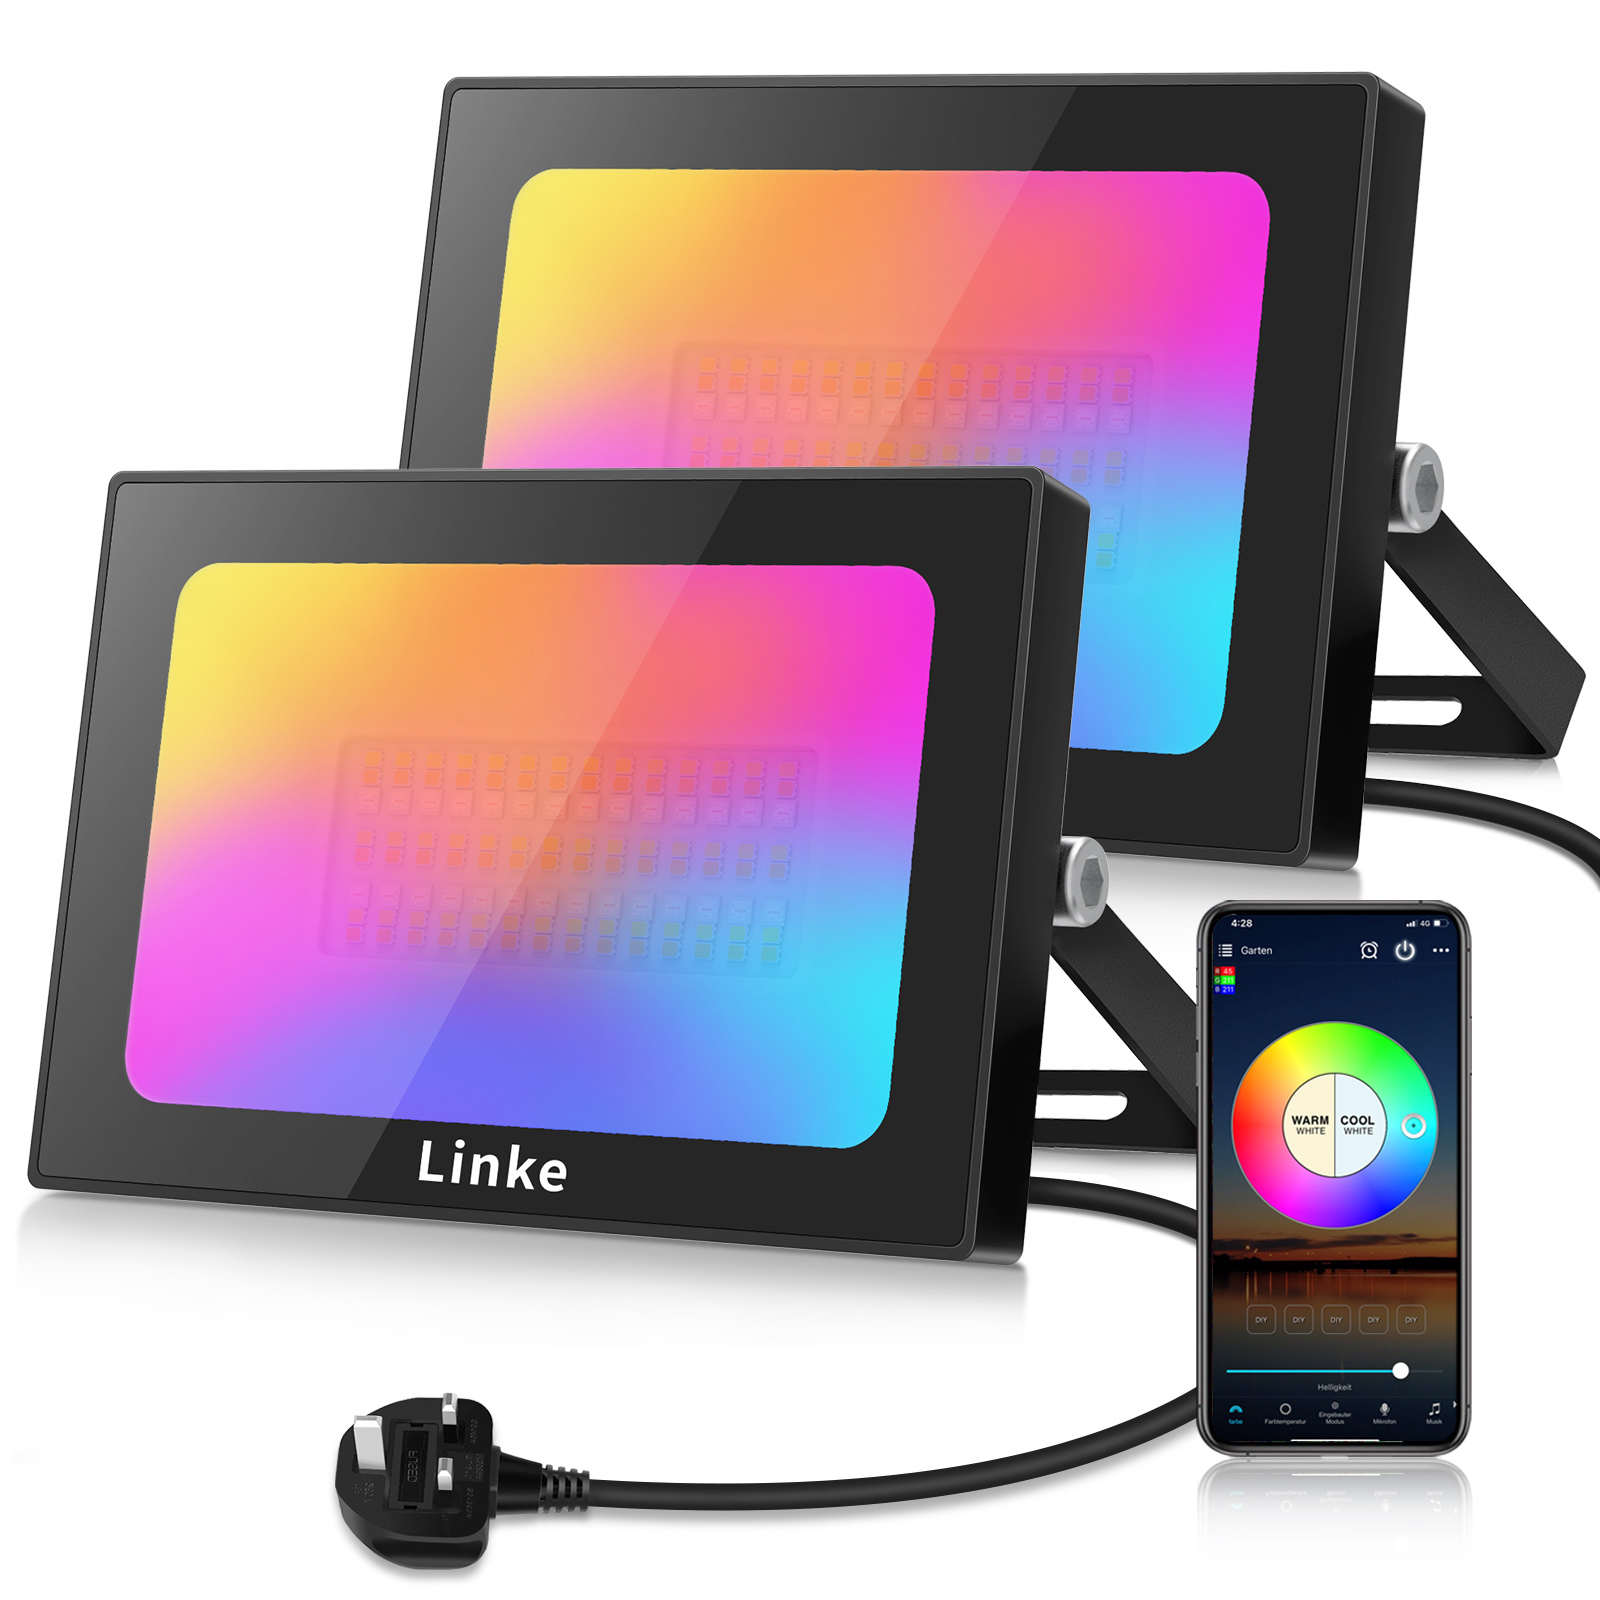 RGB Led Floodlight Linke 42W Disco Light, IP66 Waterproof Smart Colour Changing DJ Lighting, Bluetooth APP Control Dimmable Decorative Lighting for Party Stage Landscape Garden Festival 2 Pack